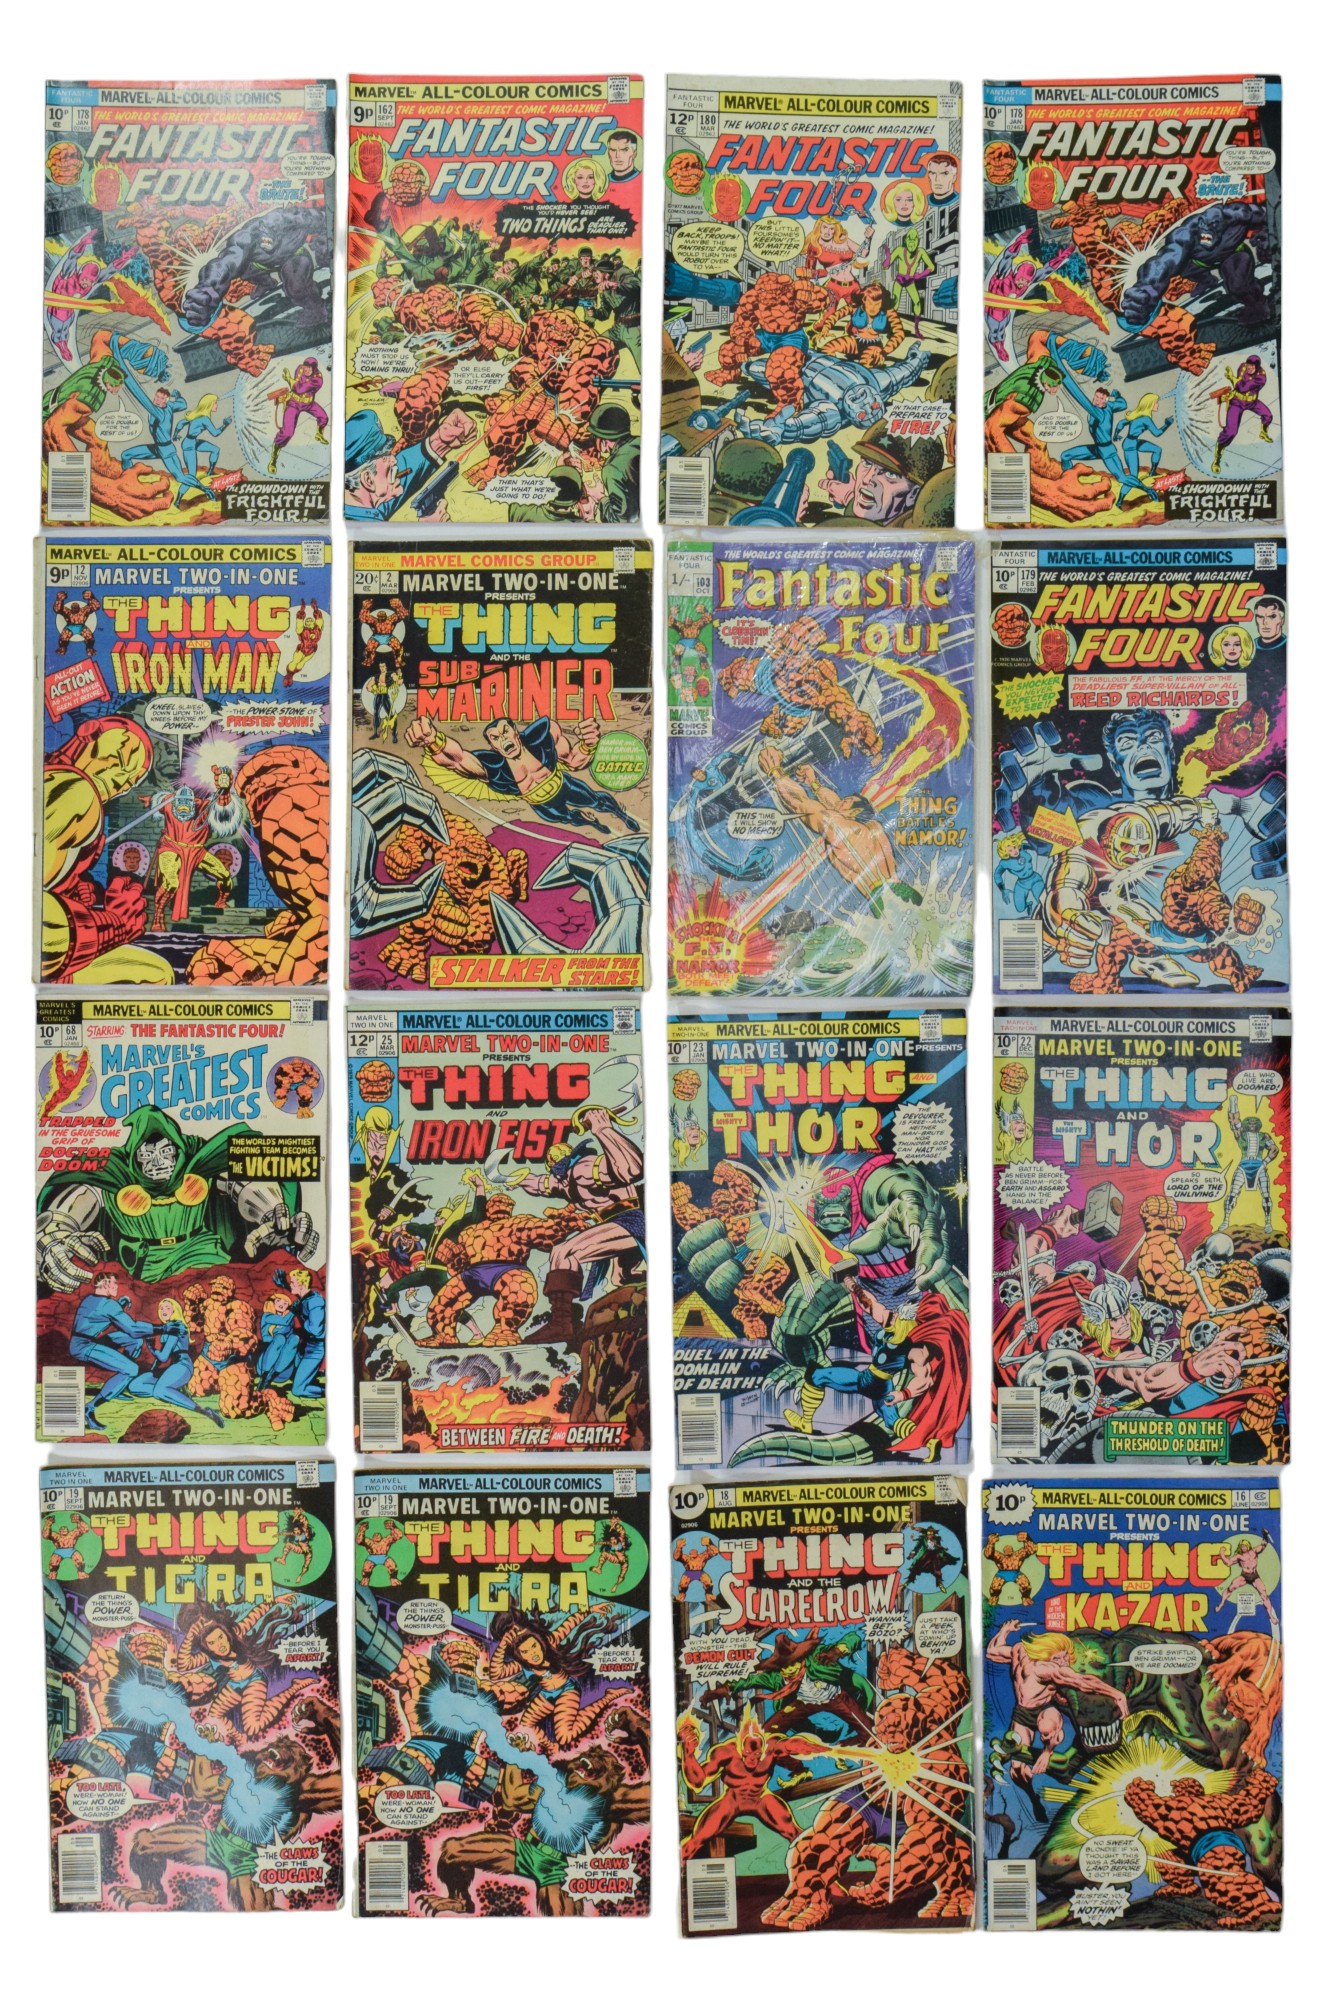 A group of 1970s Marvel comic books comprising "Fantastic Four", (October 1970 - September 1975) and